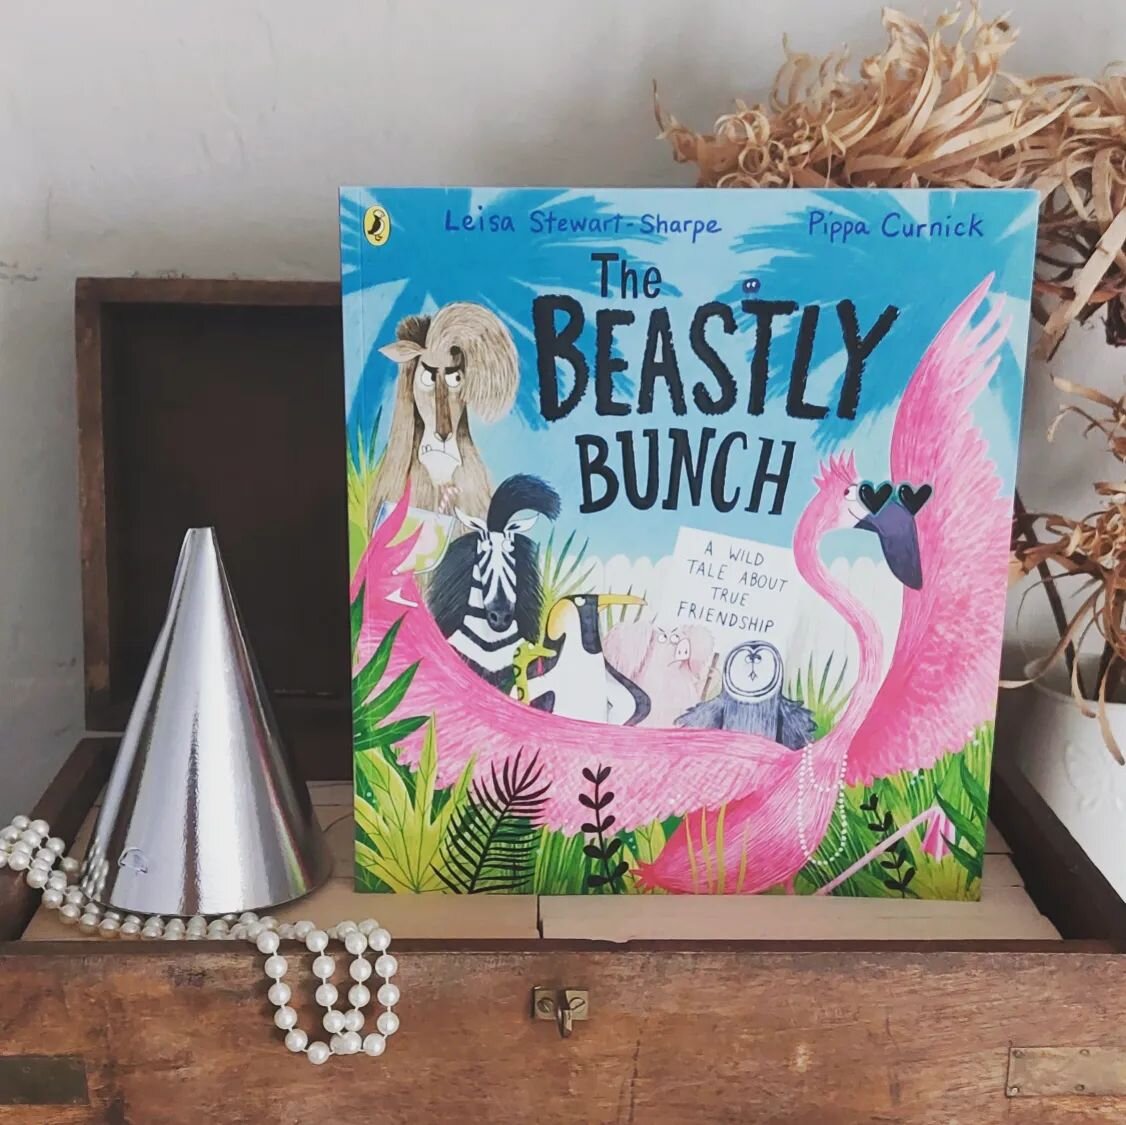 🦩 [Ad-PR Blog Tour] 📘The Beastly Bunch ✏️@leisastewartsharpe 🖌@pippa_curnick 📚@puffinbooksuk 🦩 

Flo the flamingo is FABULOUS! She throws the BEST parties in her garden oasis and there's no way her BEASTLY looking neighbours are going to be invi